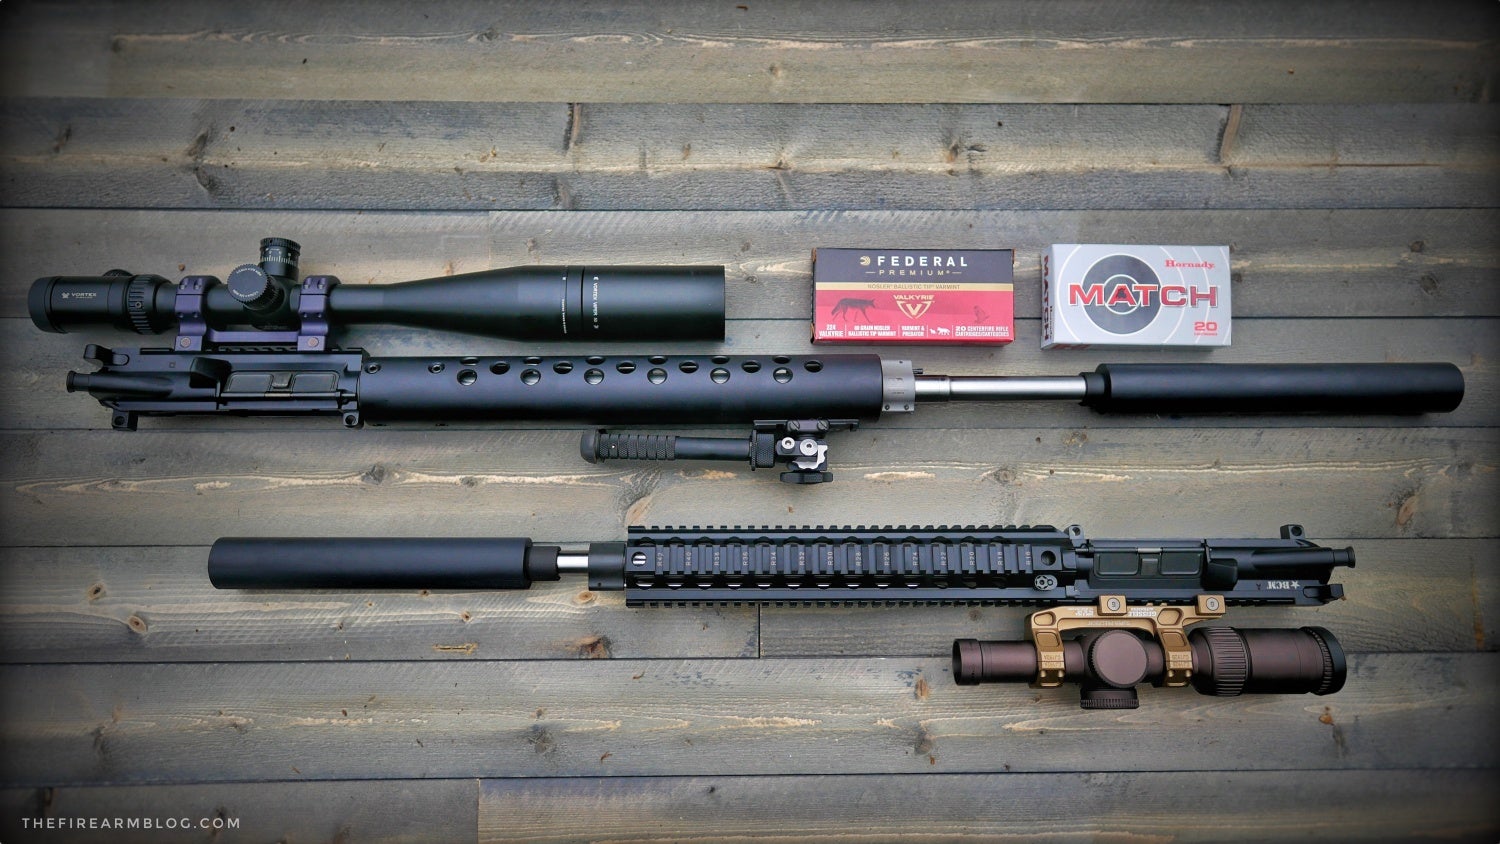 SILENCER SATURDAY #138: Picking The Best 5.56mm AR15 Suppressor For You